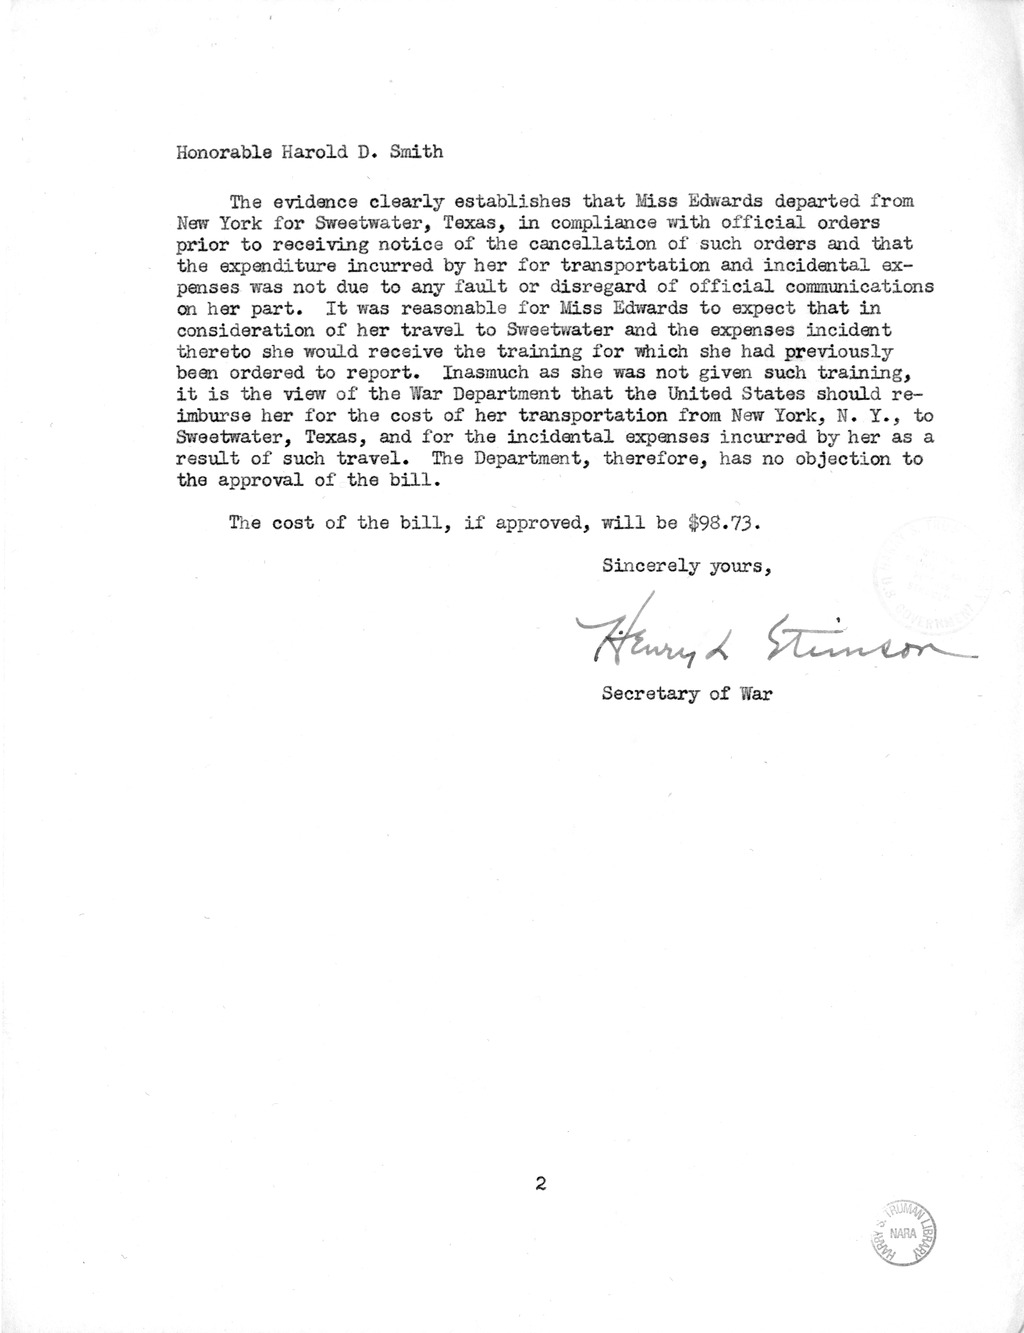 Memorandum from Frederick J. Bailey to M. C. Latta, H.R. 2001, for the Relief of Betty Ellen Edwards, with Attachments